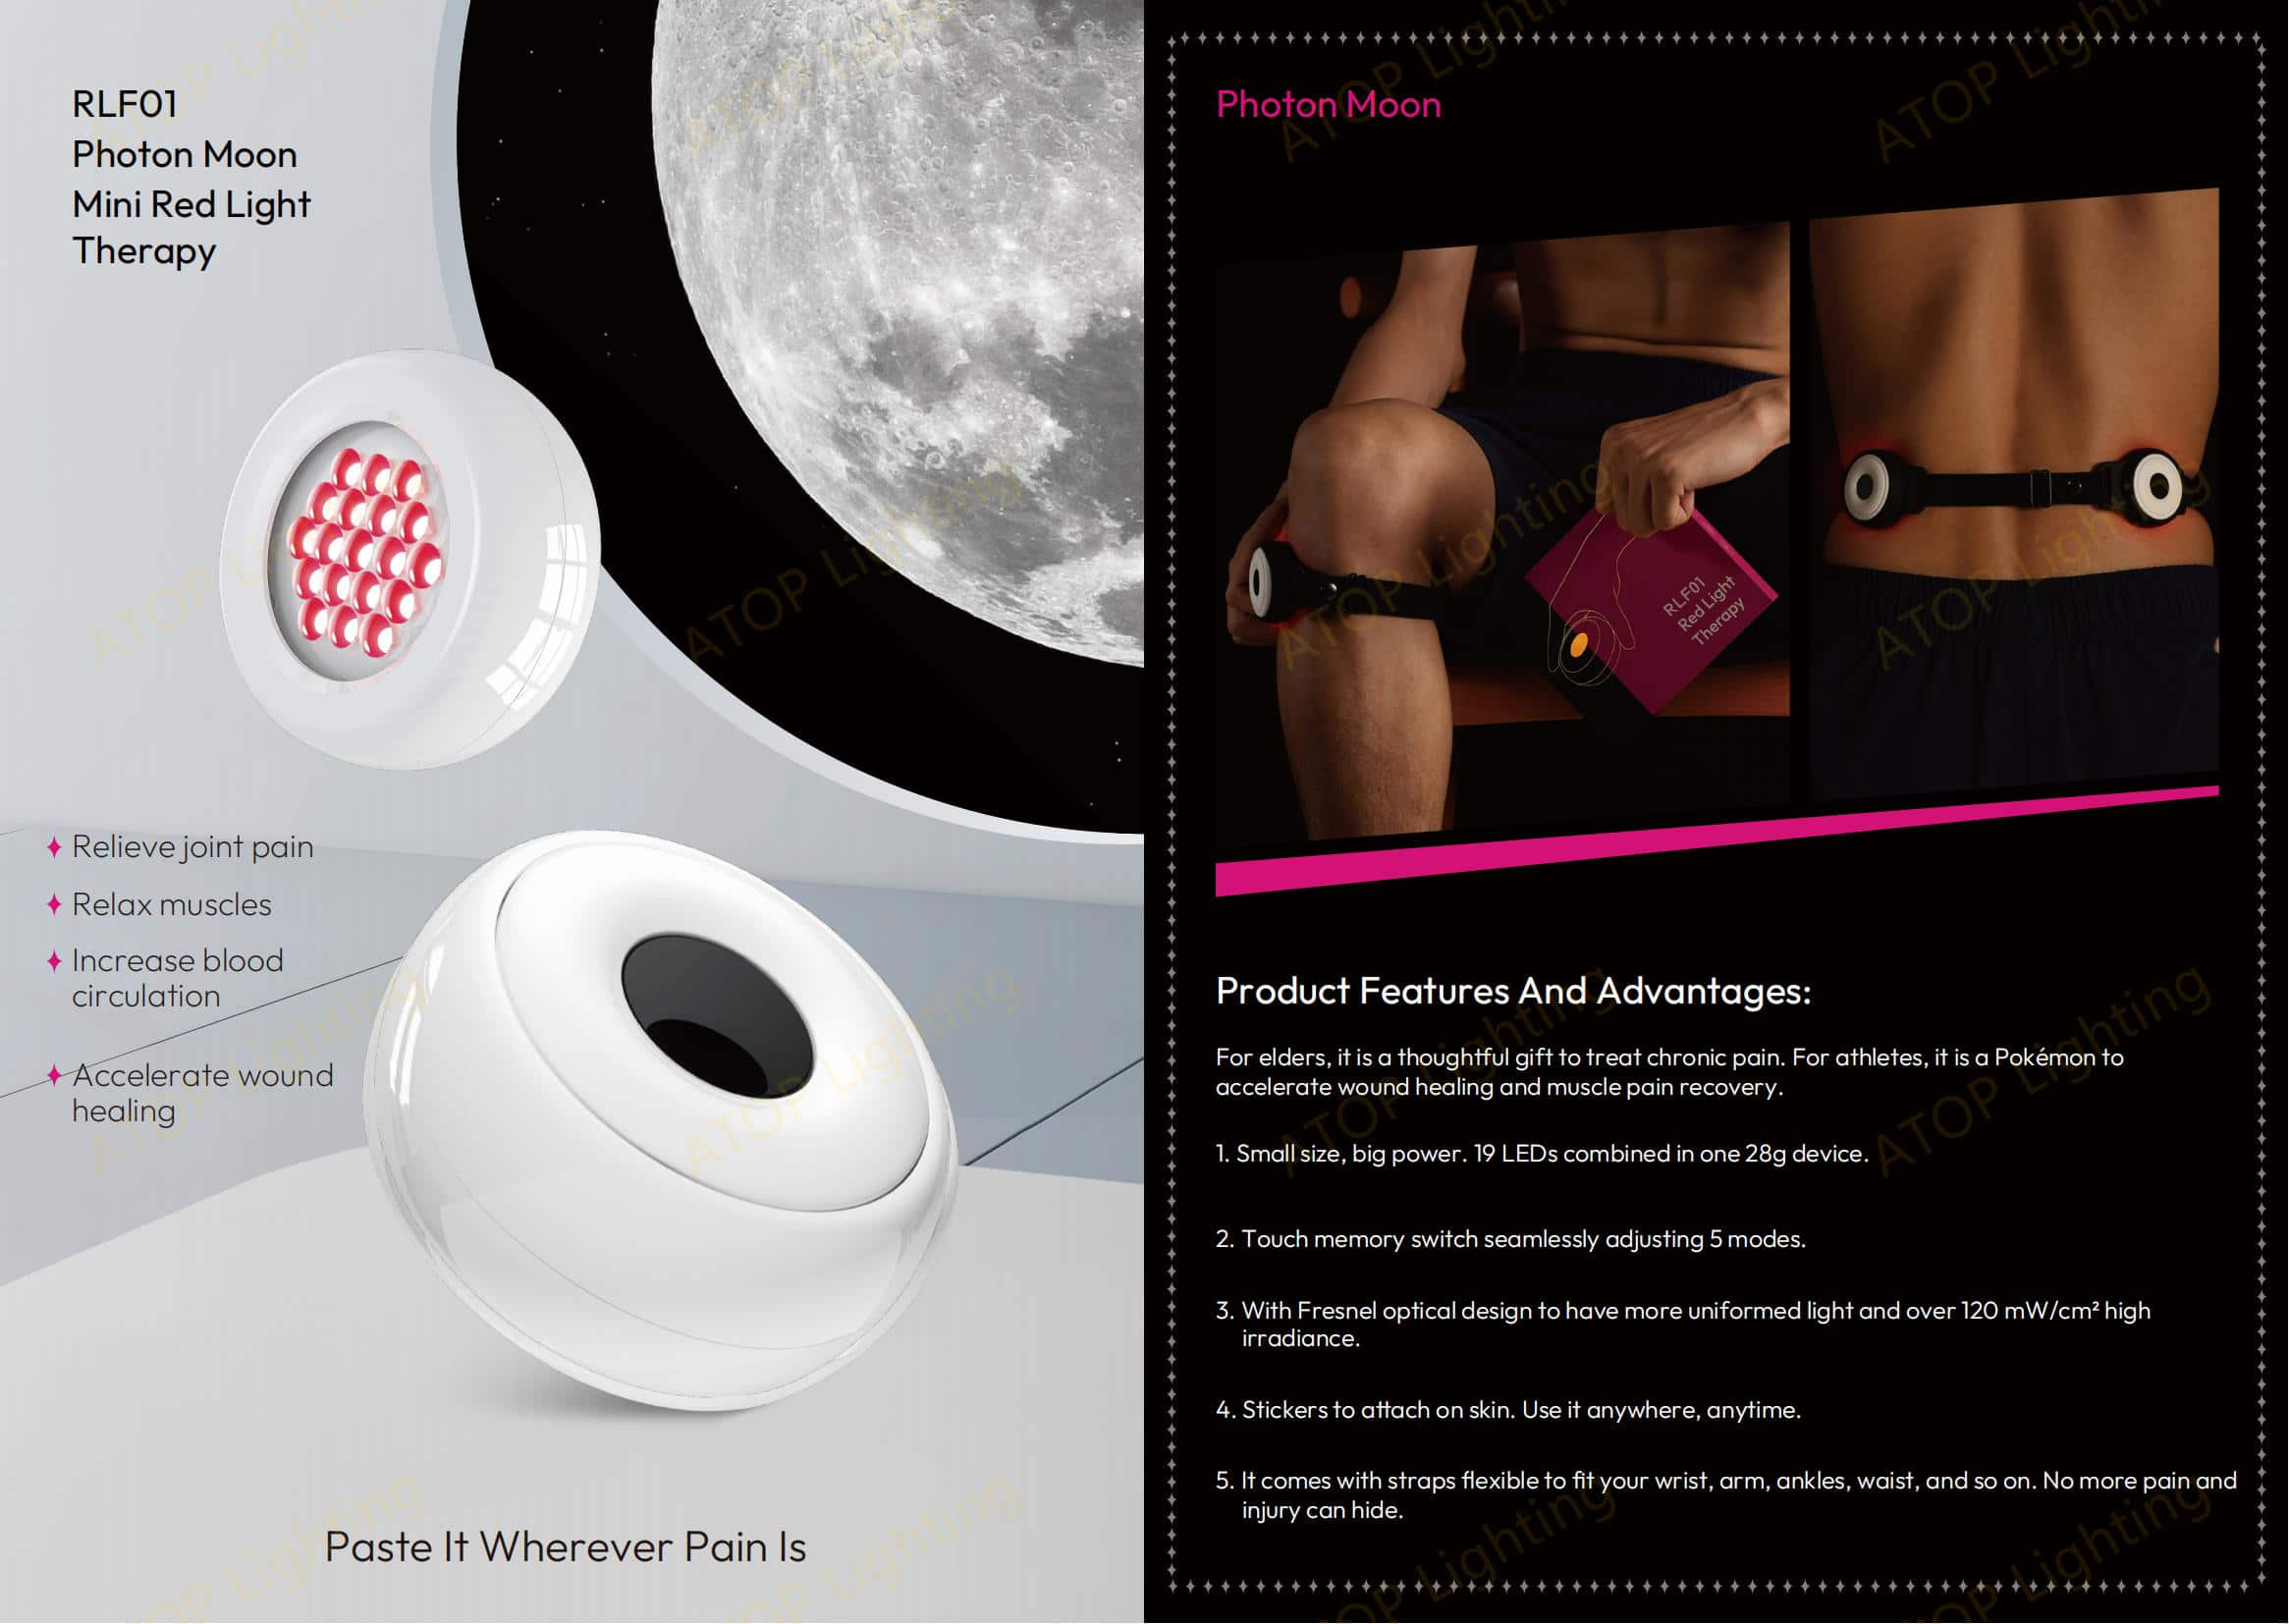 RFL01 Photon Moon Mini Red Light Therapy